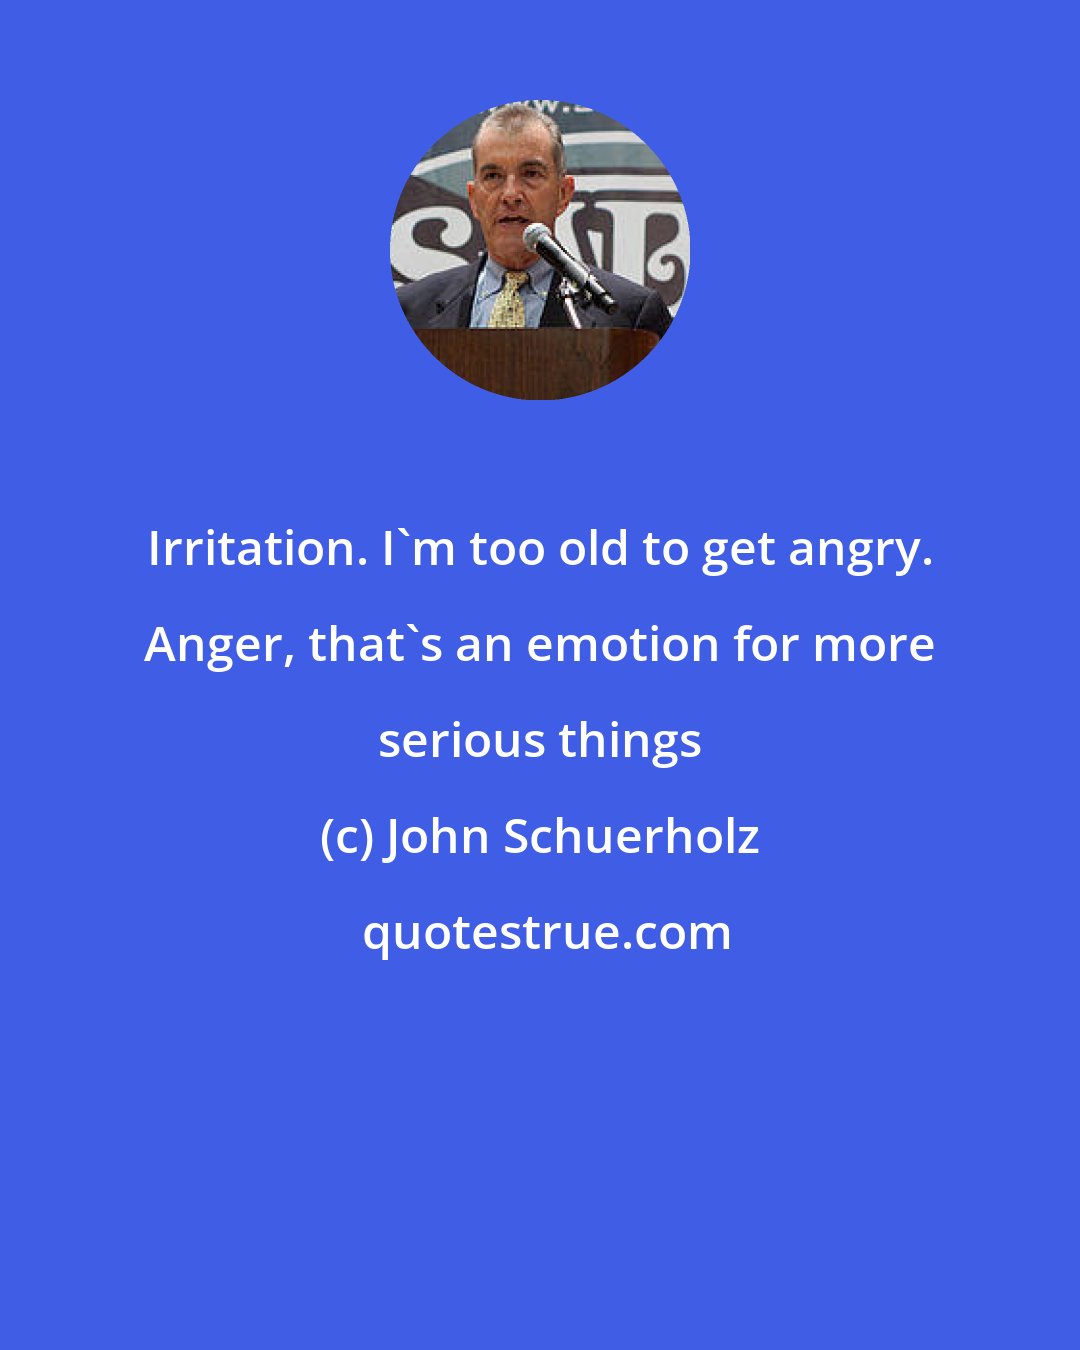 John Schuerholz: Irritation. I'm too old to get angry. Anger, that's an emotion for more serious things